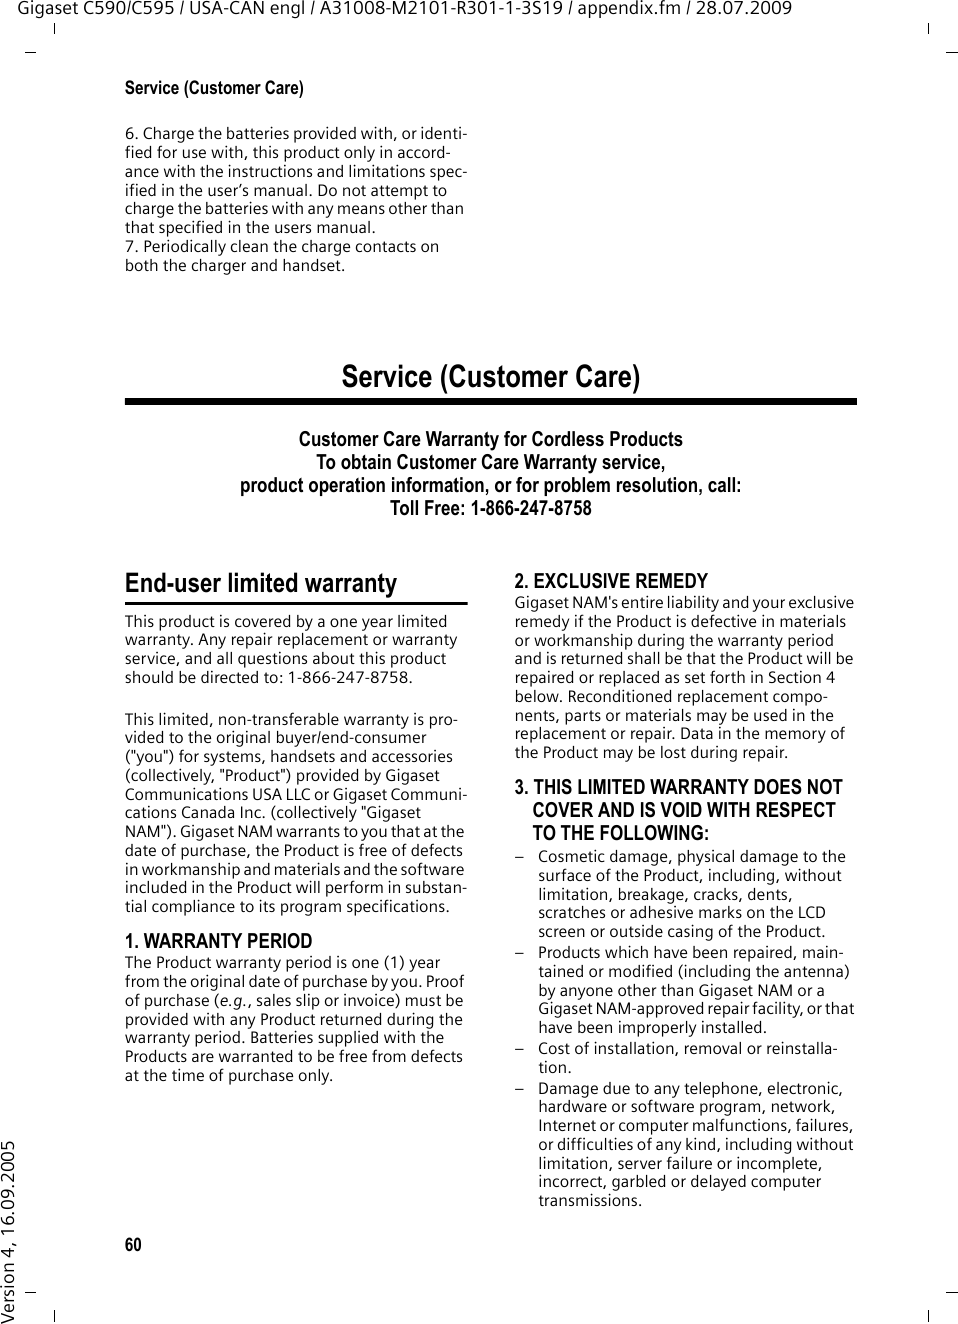 60Service (Customer Care)Gigaset C590/C595 / USA-CAN engl / A31008-M2101-R301-1-3S19 / appendix.fm / 28.07.2009Version 4, 16.09.20056. Charge the batteries provided with, or identi-fied for use with, this product only in accord-ance with the instructions and limitations spec-ified in the user’s manual. Do not attempt to charge the batteries with any means other than that specified in the users manual.7. Periodically clean the charge contacts on both the charger and handset.Service (Customer Care)Customer Care Warranty for Cordless ProductsTo obtain Customer Care Warranty service,product operation information, or for problem resolution, call:Toll Free: 1-866-247-8758End-user limited warrantyThis product is covered by a one year limited warranty. Any repair replacement or warranty service, and all questions about this product should be directed to: 1-866-247-8758.This limited, non-transferable warranty is pro-vided to the original buyer/end-consumer (&quot;you&quot;) for systems, handsets and accessories (collectively, &quot;Product&quot;) provided by Gigaset Communications USA LLC or Gigaset Communi-cations Canada Inc. (collectively &quot;Gigaset NAM&quot;). Gigaset NAM warrants to you that at the date of purchase, the Product is free of defects in workmanship and materials and the software included in the Product will perform in substan-tial compliance to its program specifications.1. WARRANTY PERIODThe Product warranty period is one (1) year from the original date of purchase by you. Proof of purchase (e.g., sales slip or invoice) must be provided with any Product returned during the warranty period. Batteries supplied with the Products are warranted to be free from defects at the time of purchase only.2. EXCLUSIVE REMEDYGigaset NAM&apos;s entire liability and your exclusive remedy if the Product is defective in materials or workmanship during the warranty period and is returned shall be that the Product will be repaired or replaced as set forth in Section 4 below. Reconditioned replacement compo-nents, parts or materials may be used in the replacement or repair. Data in the memory of the Product may be lost during repair.3. THIS LIMITED WARRANTY DOES NOT COVER AND IS VOID WITH RESPECT TO THE FOLLOWING:– Cosmetic damage, physical damage to the surface of the Product, including, without limitation, breakage, cracks, dents, scratches or adhesive marks on the LCD screen or outside casing of the Product.– Products which have been repaired, main-tained or modified (including the antenna) by anyone other than Gigaset NAM or a Gigaset NAM-approved repair facility, or that have been improperly installed. – Cost of installation, removal or reinstalla-tion.– Damage due to any telephone, electronic, hardware or software program, network, Internet or computer malfunctions, failures, or difficulties of any kind, including without limitation, server failure or incomplete, incorrect, garbled or delayed computer transmissions.